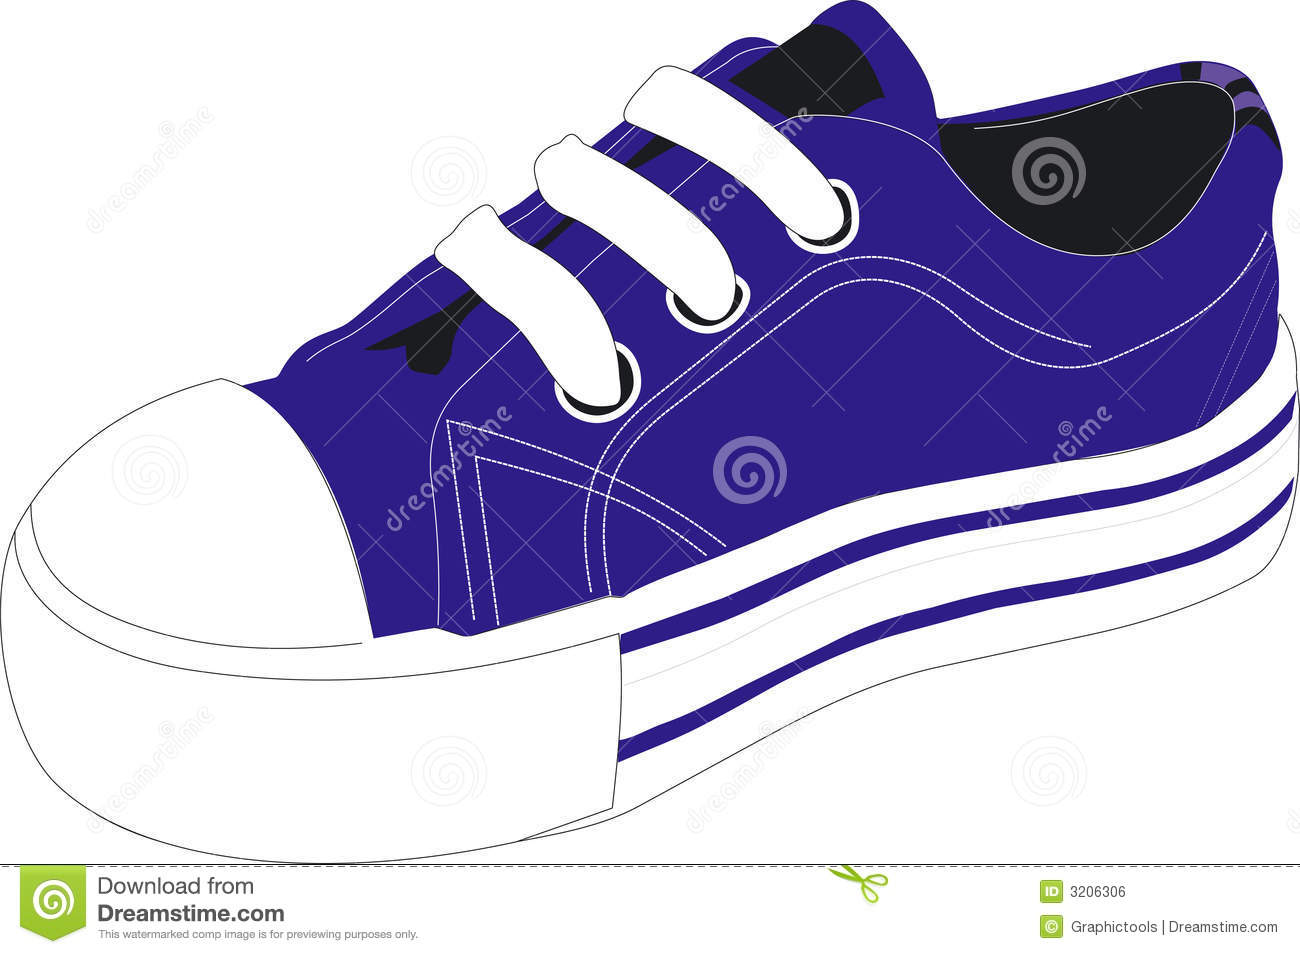 Blue Canvas Sneaker Tennis Or Athletic Shoe Isolated On A White